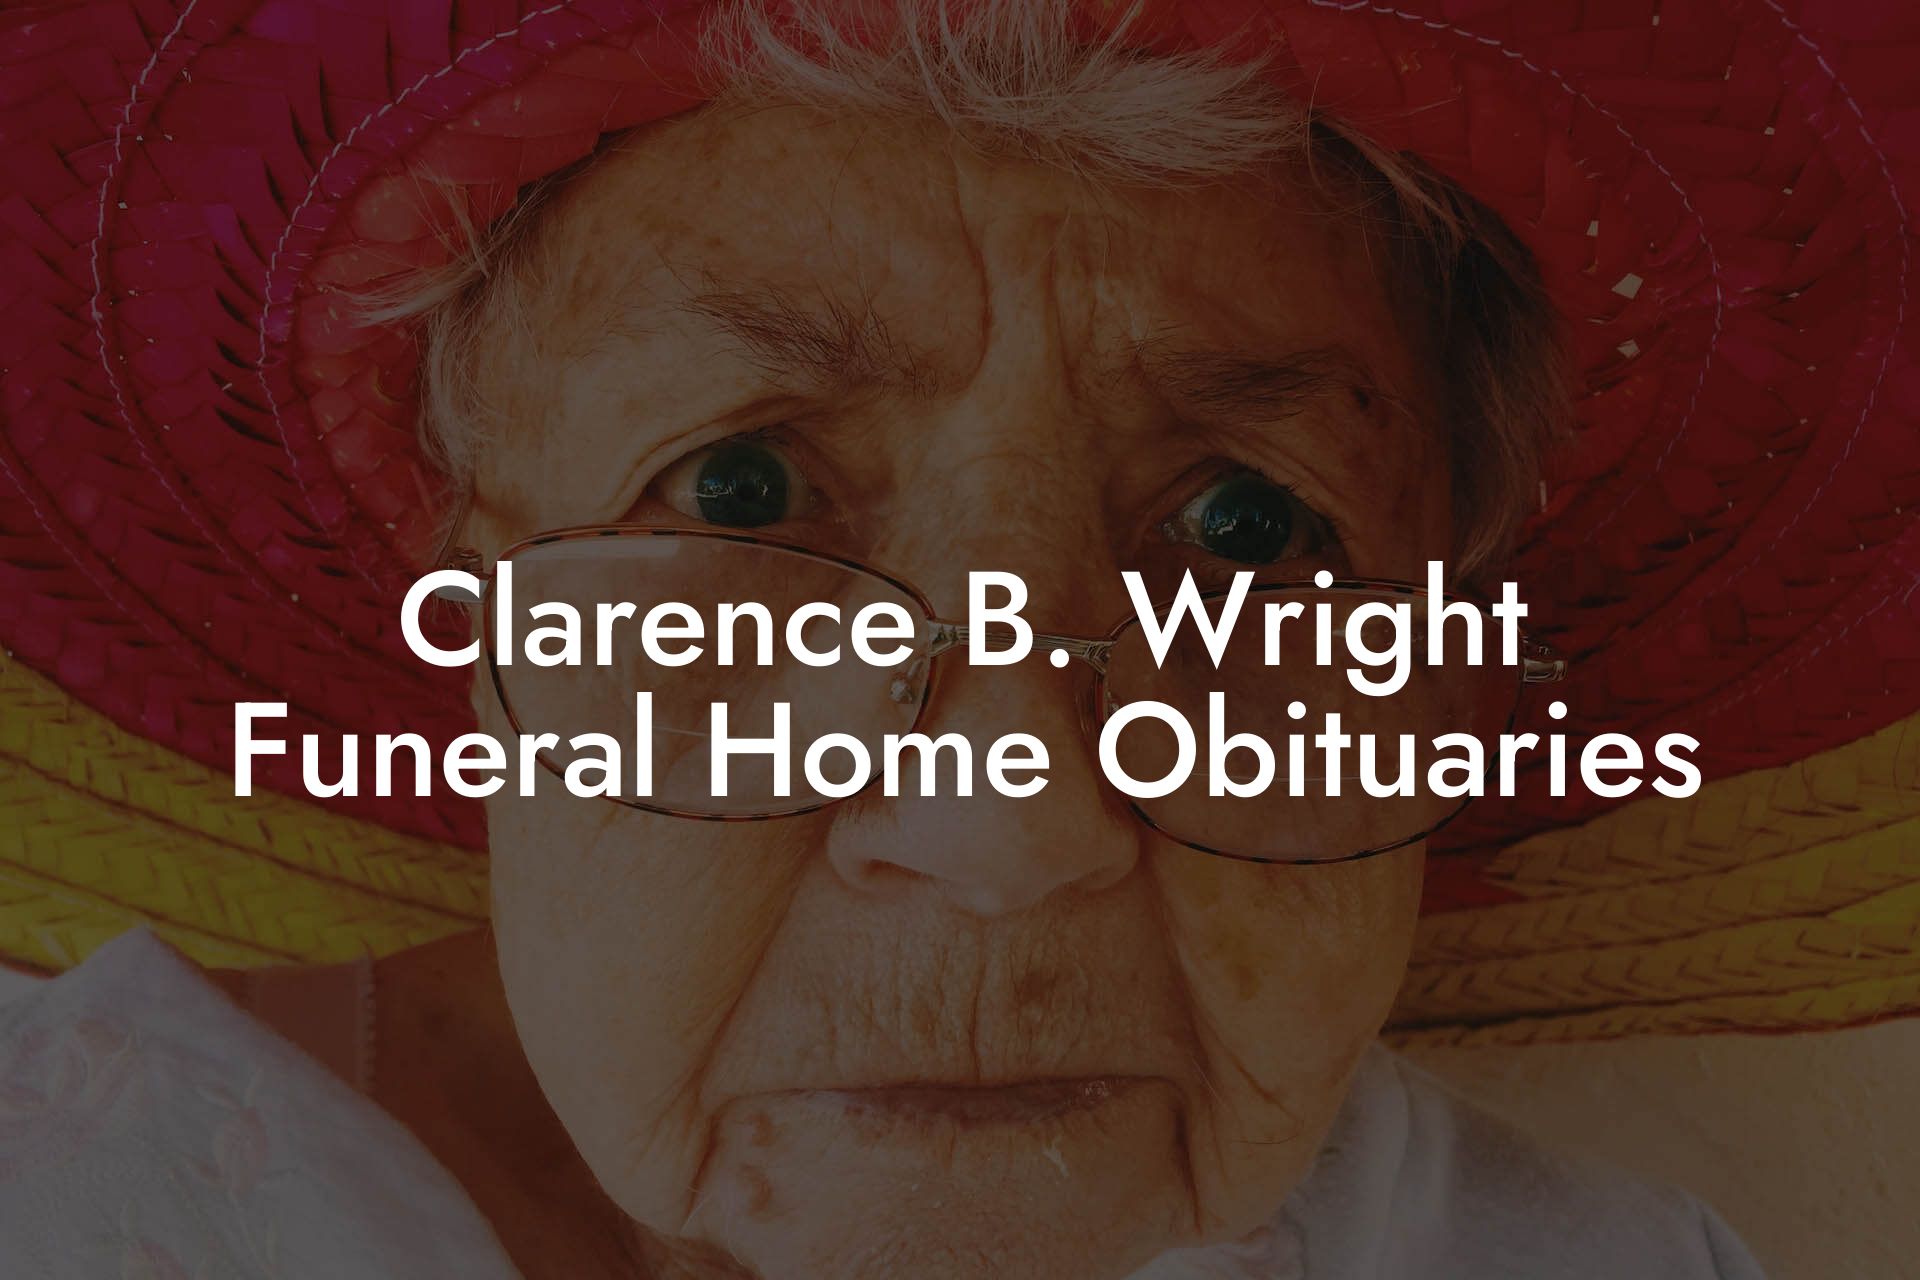 Clarence B. Wright Funeral Home Obituaries